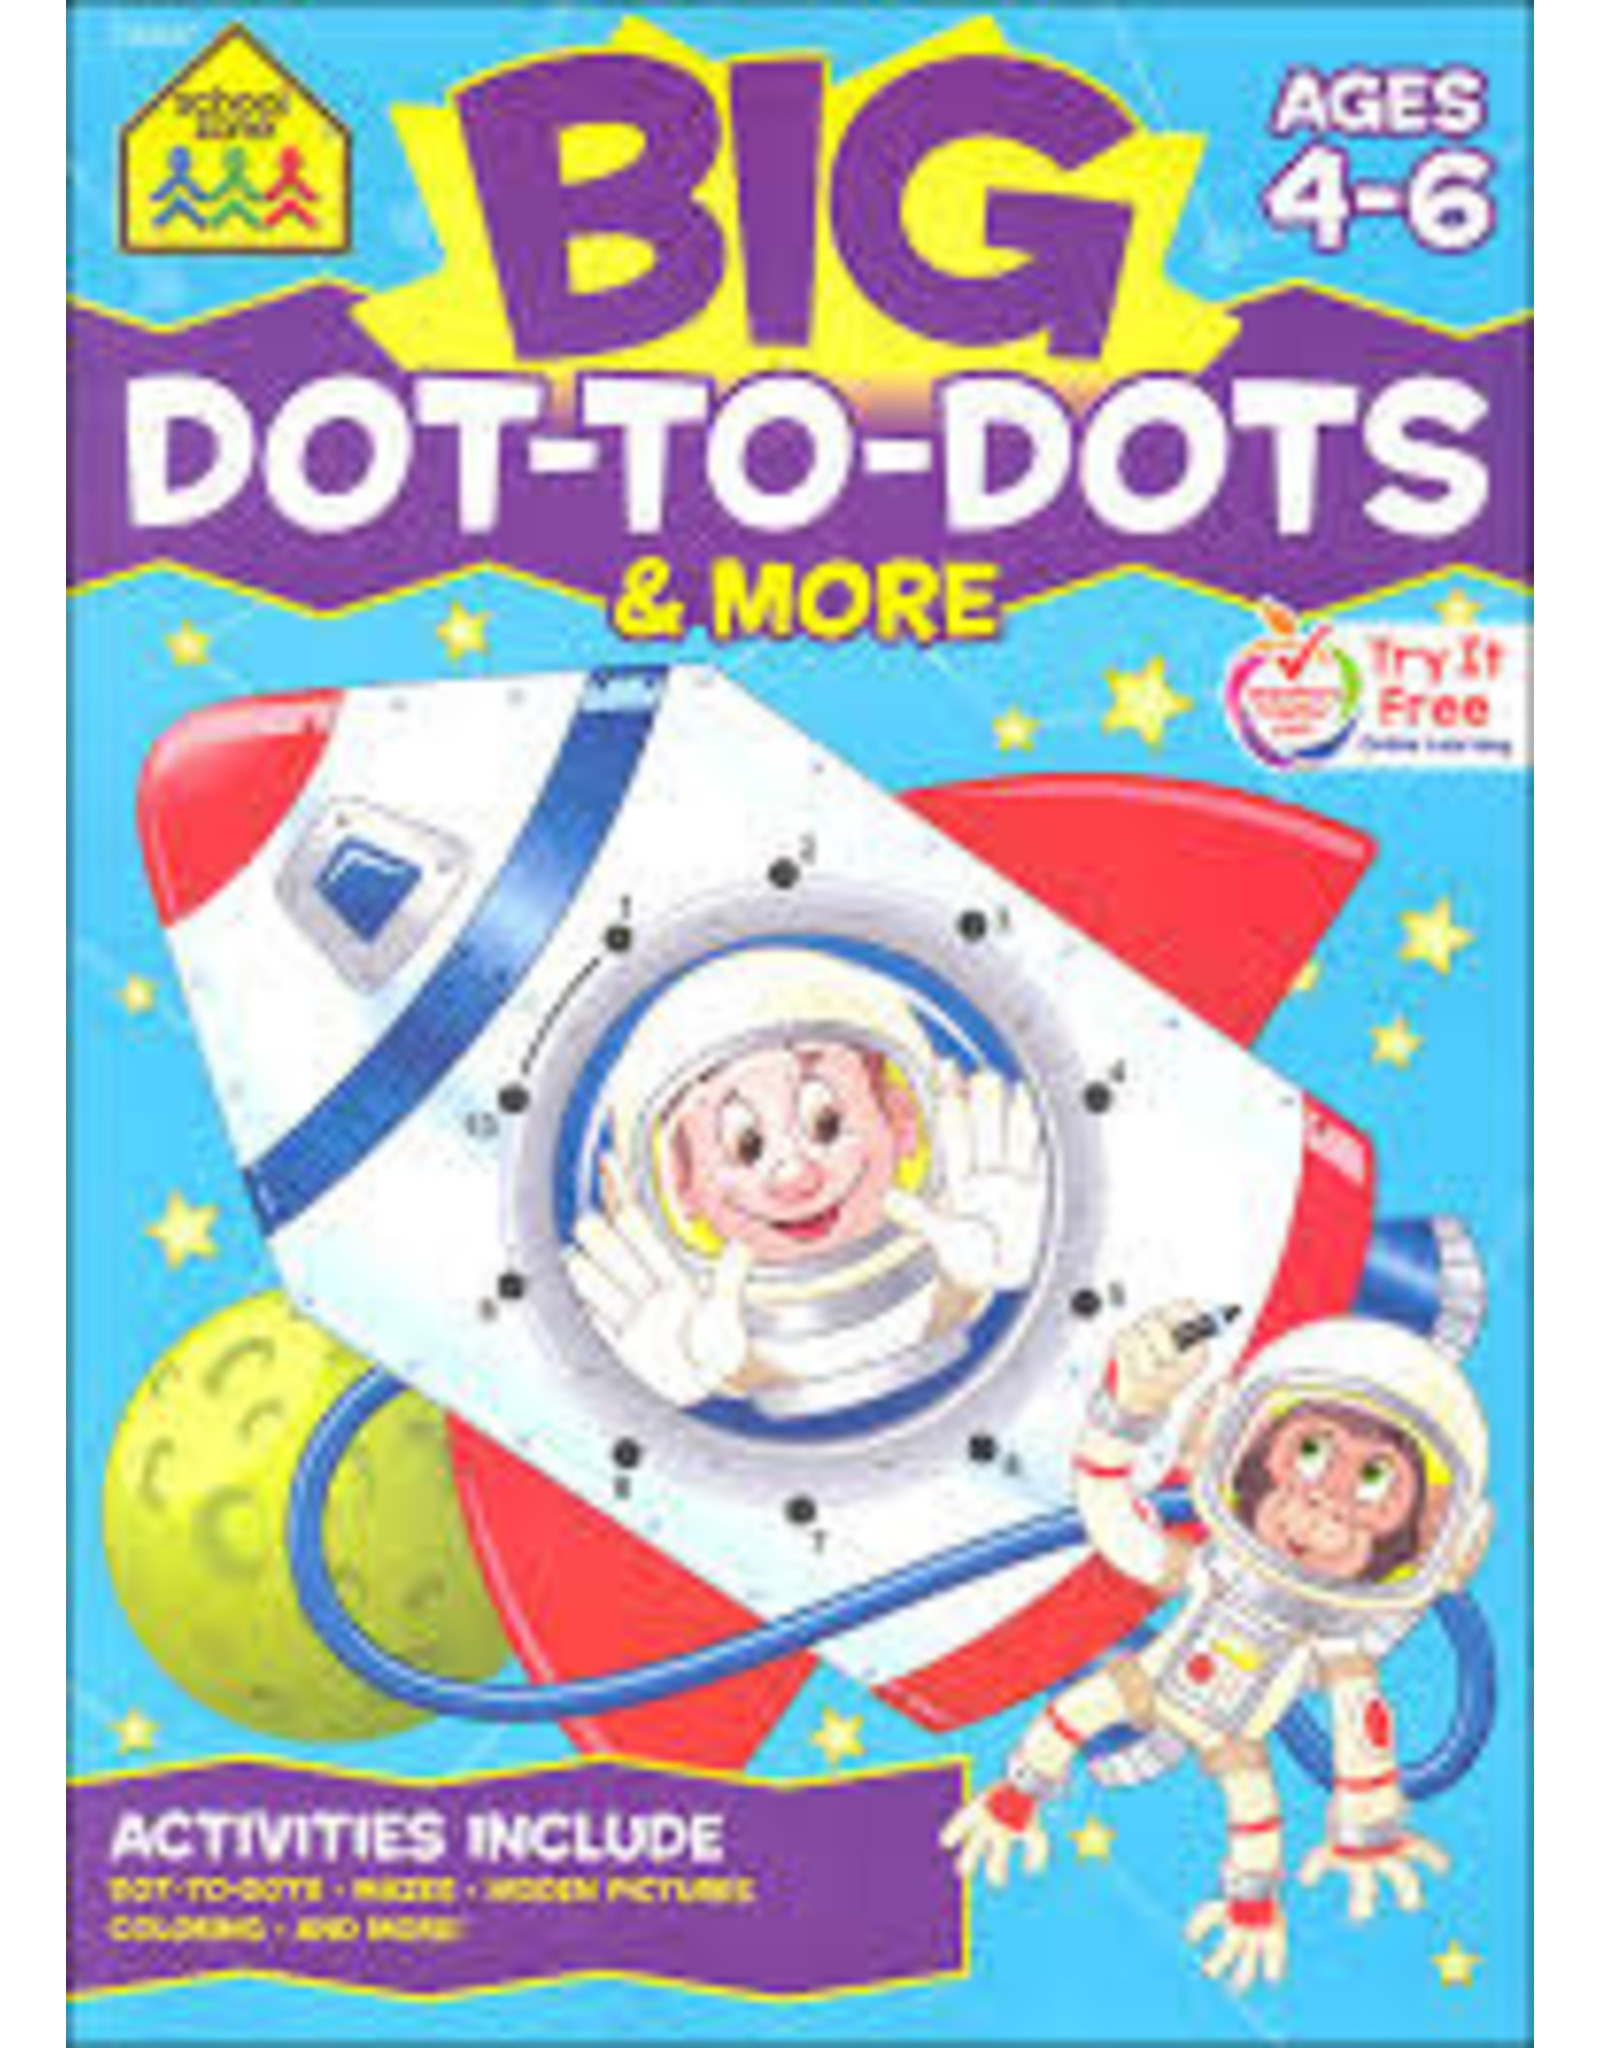 Big Dot to Dot ages 4-6